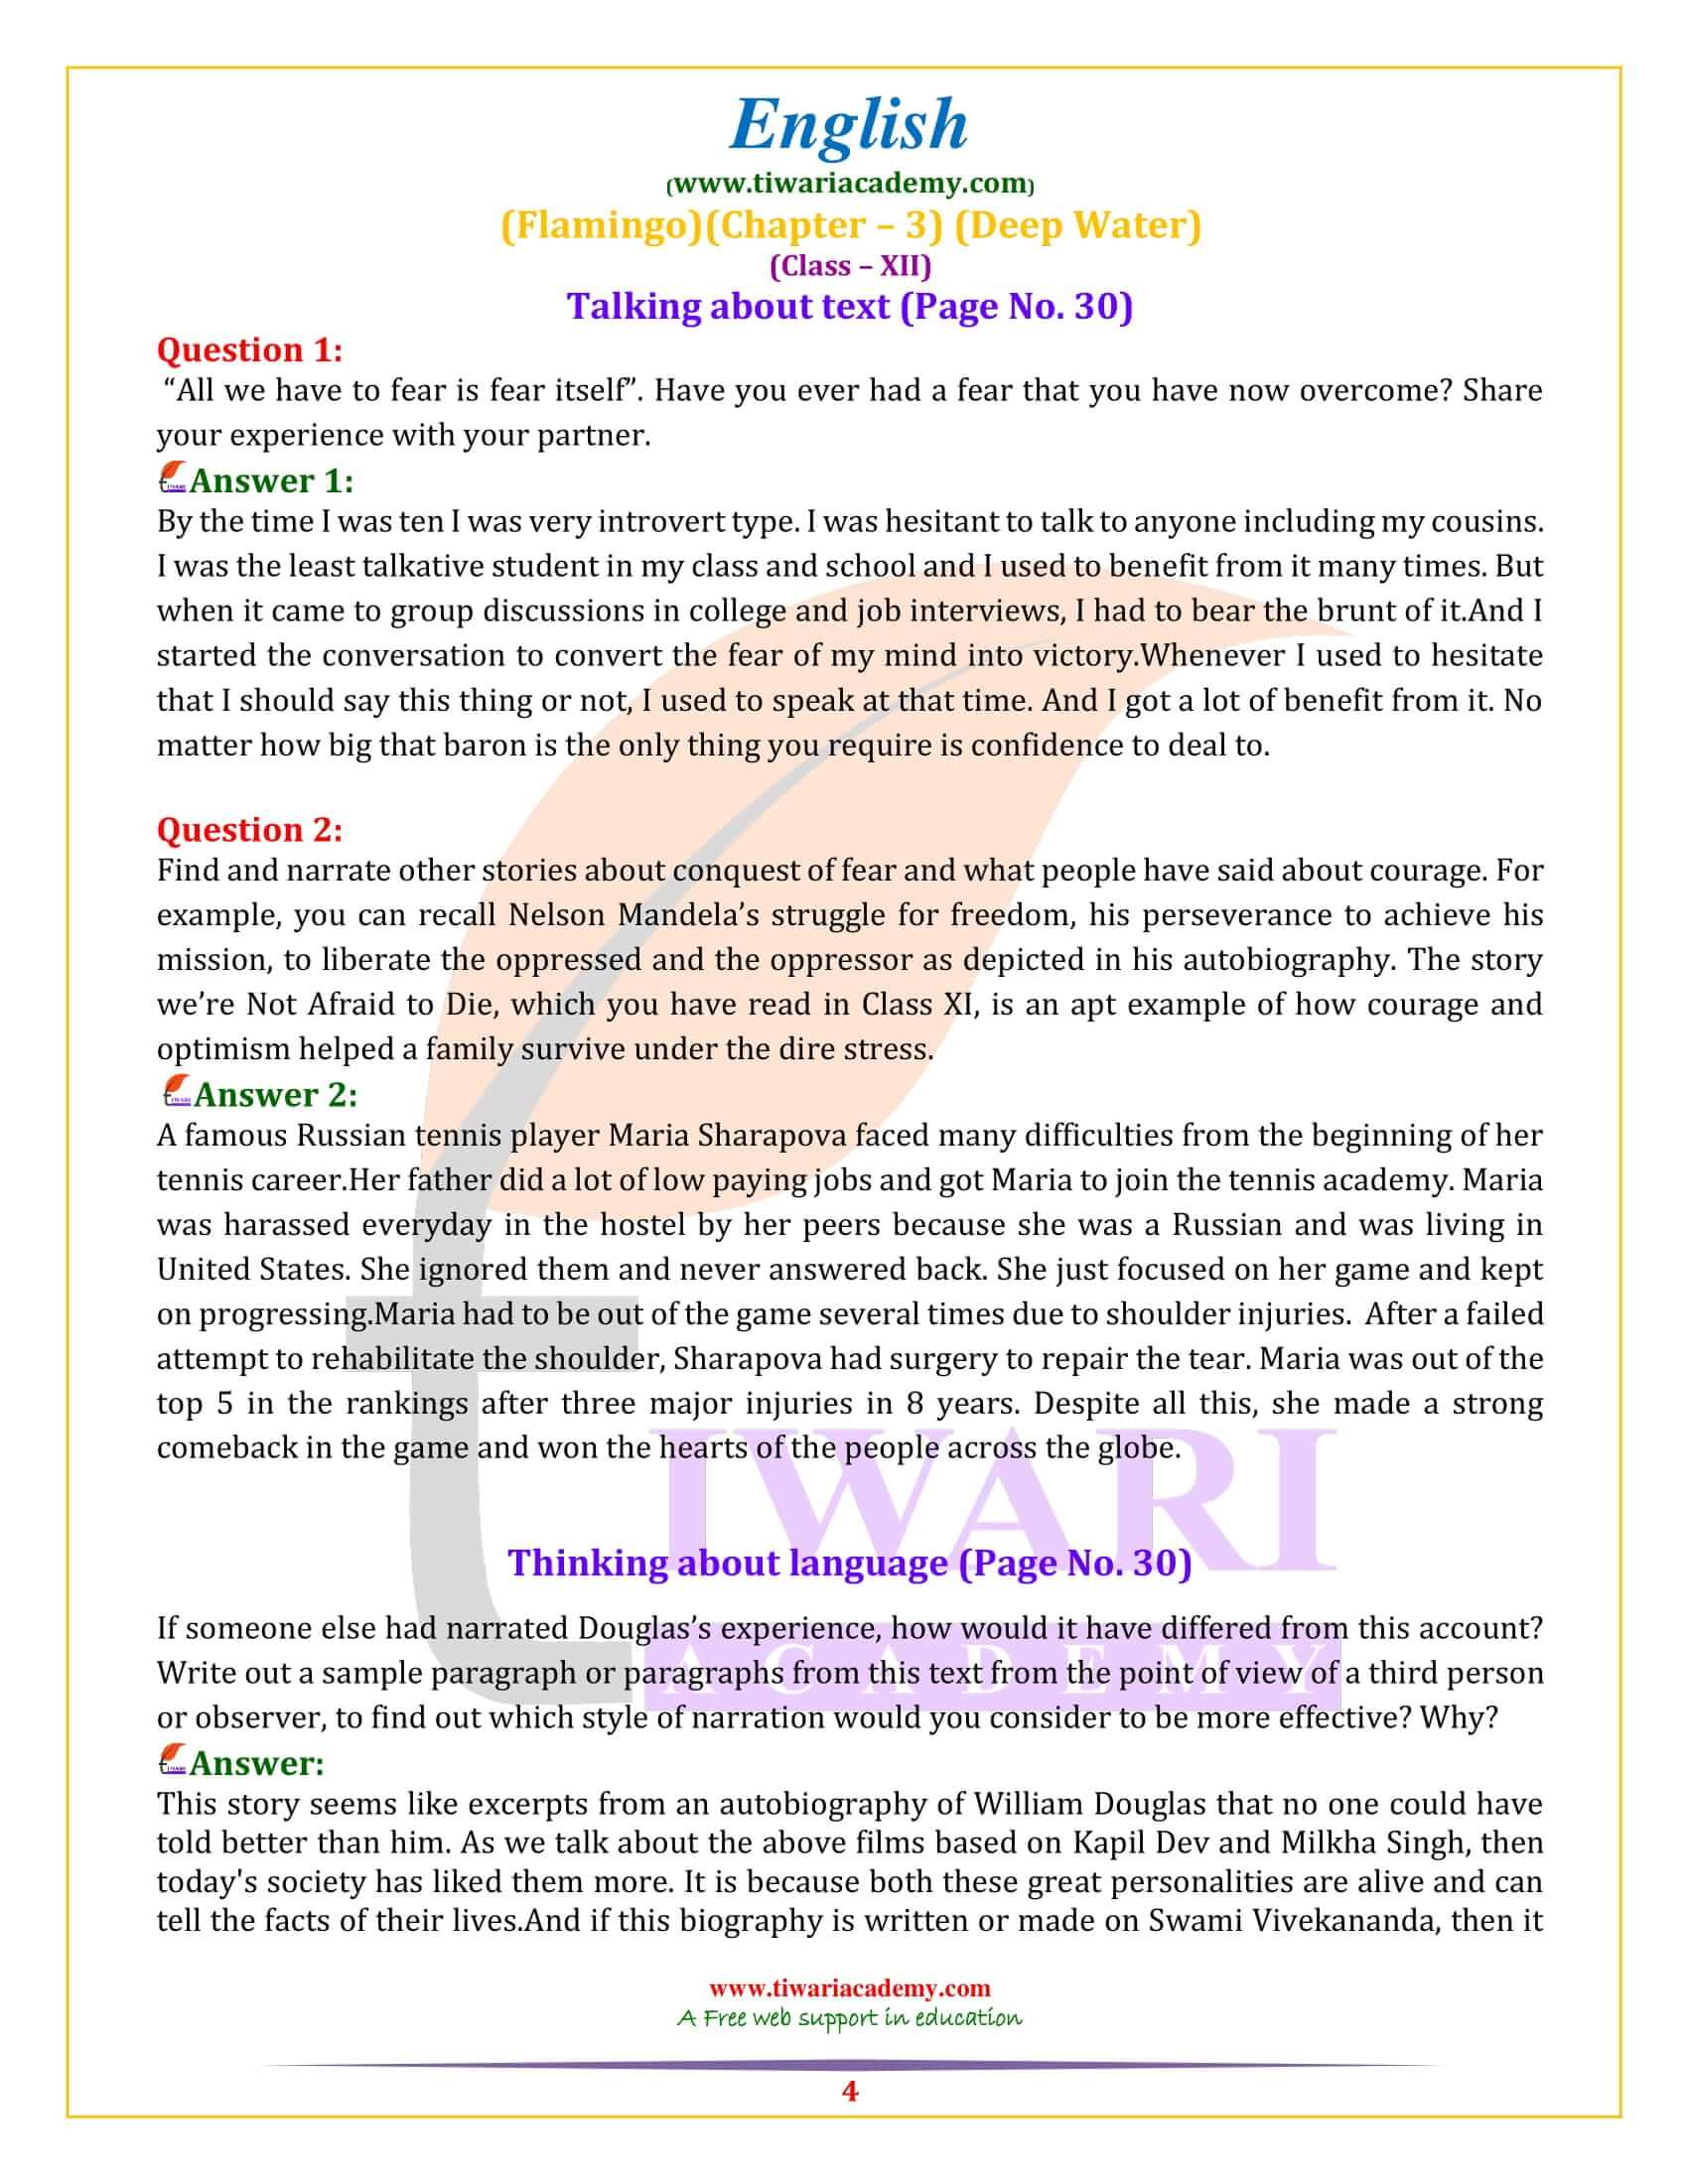 NCERT Solutions for Class 12 English Flamingo Chapter 3